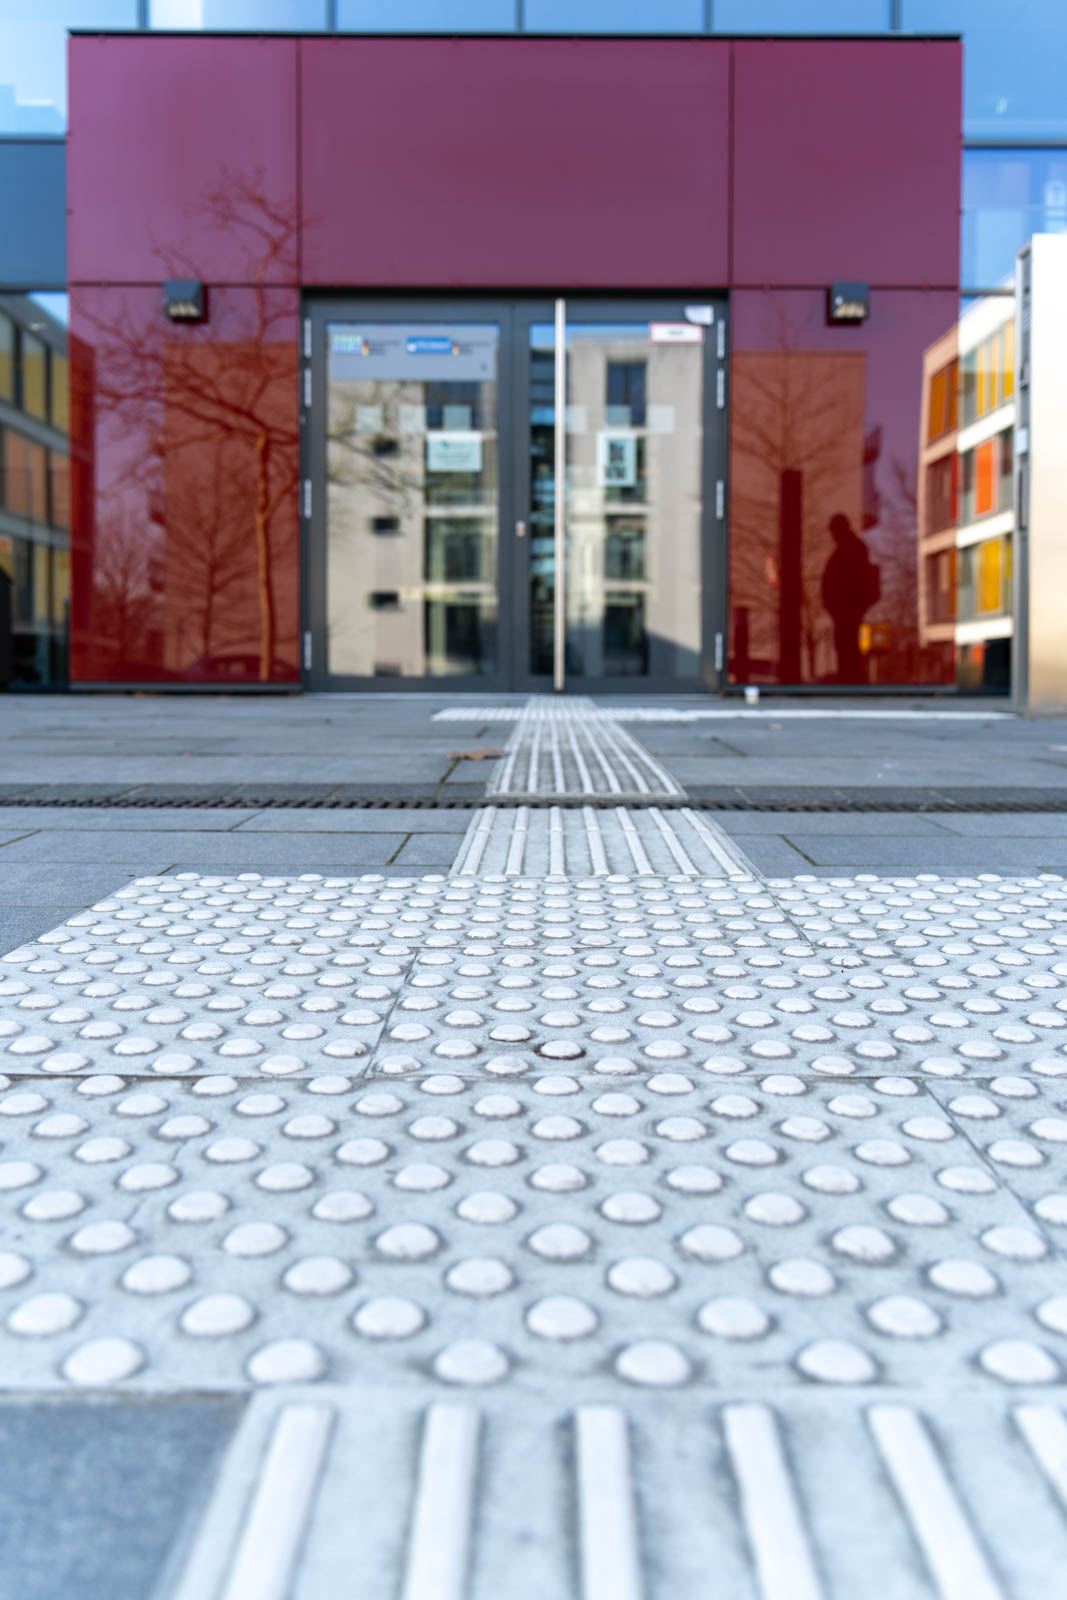 Campus of Bielefeld University Guiding system for the blind